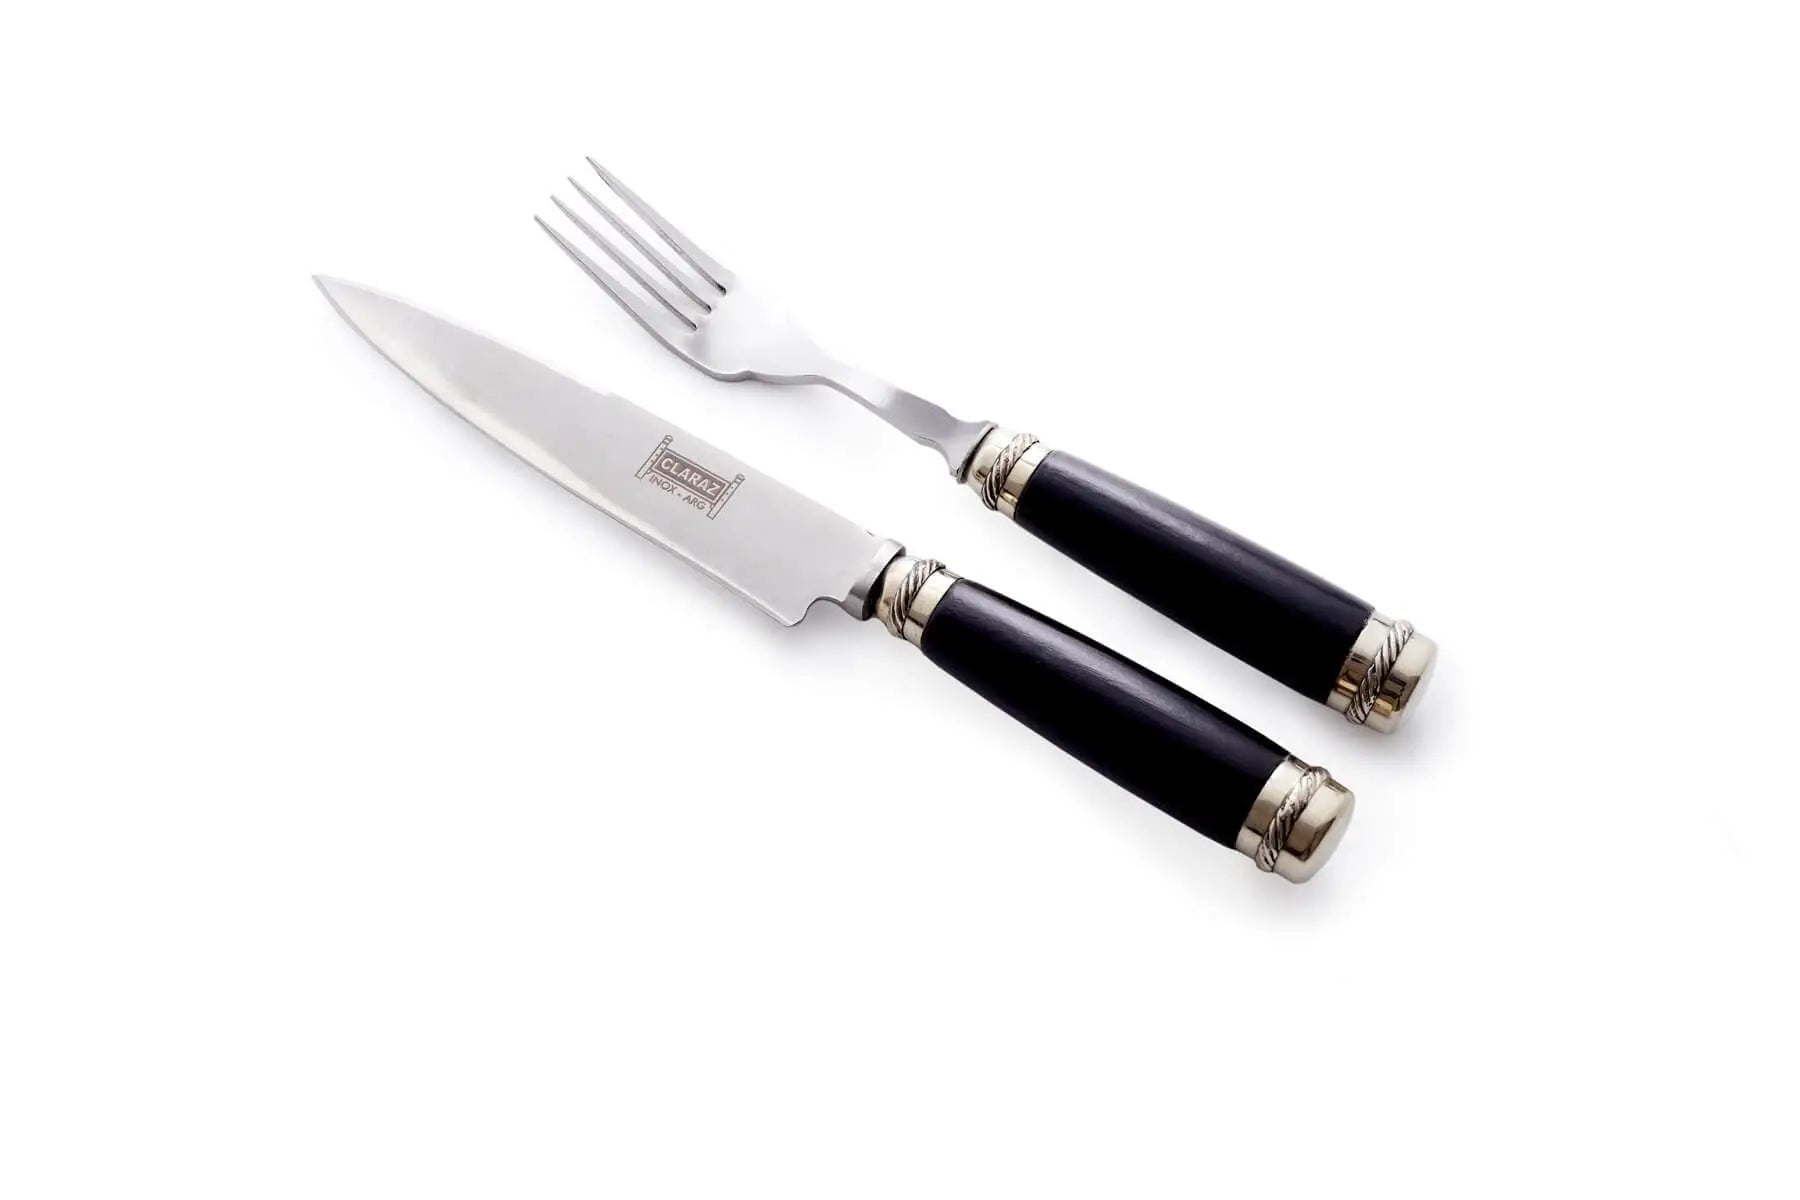 Wood handles combined with nickel silver luxury cutlery set